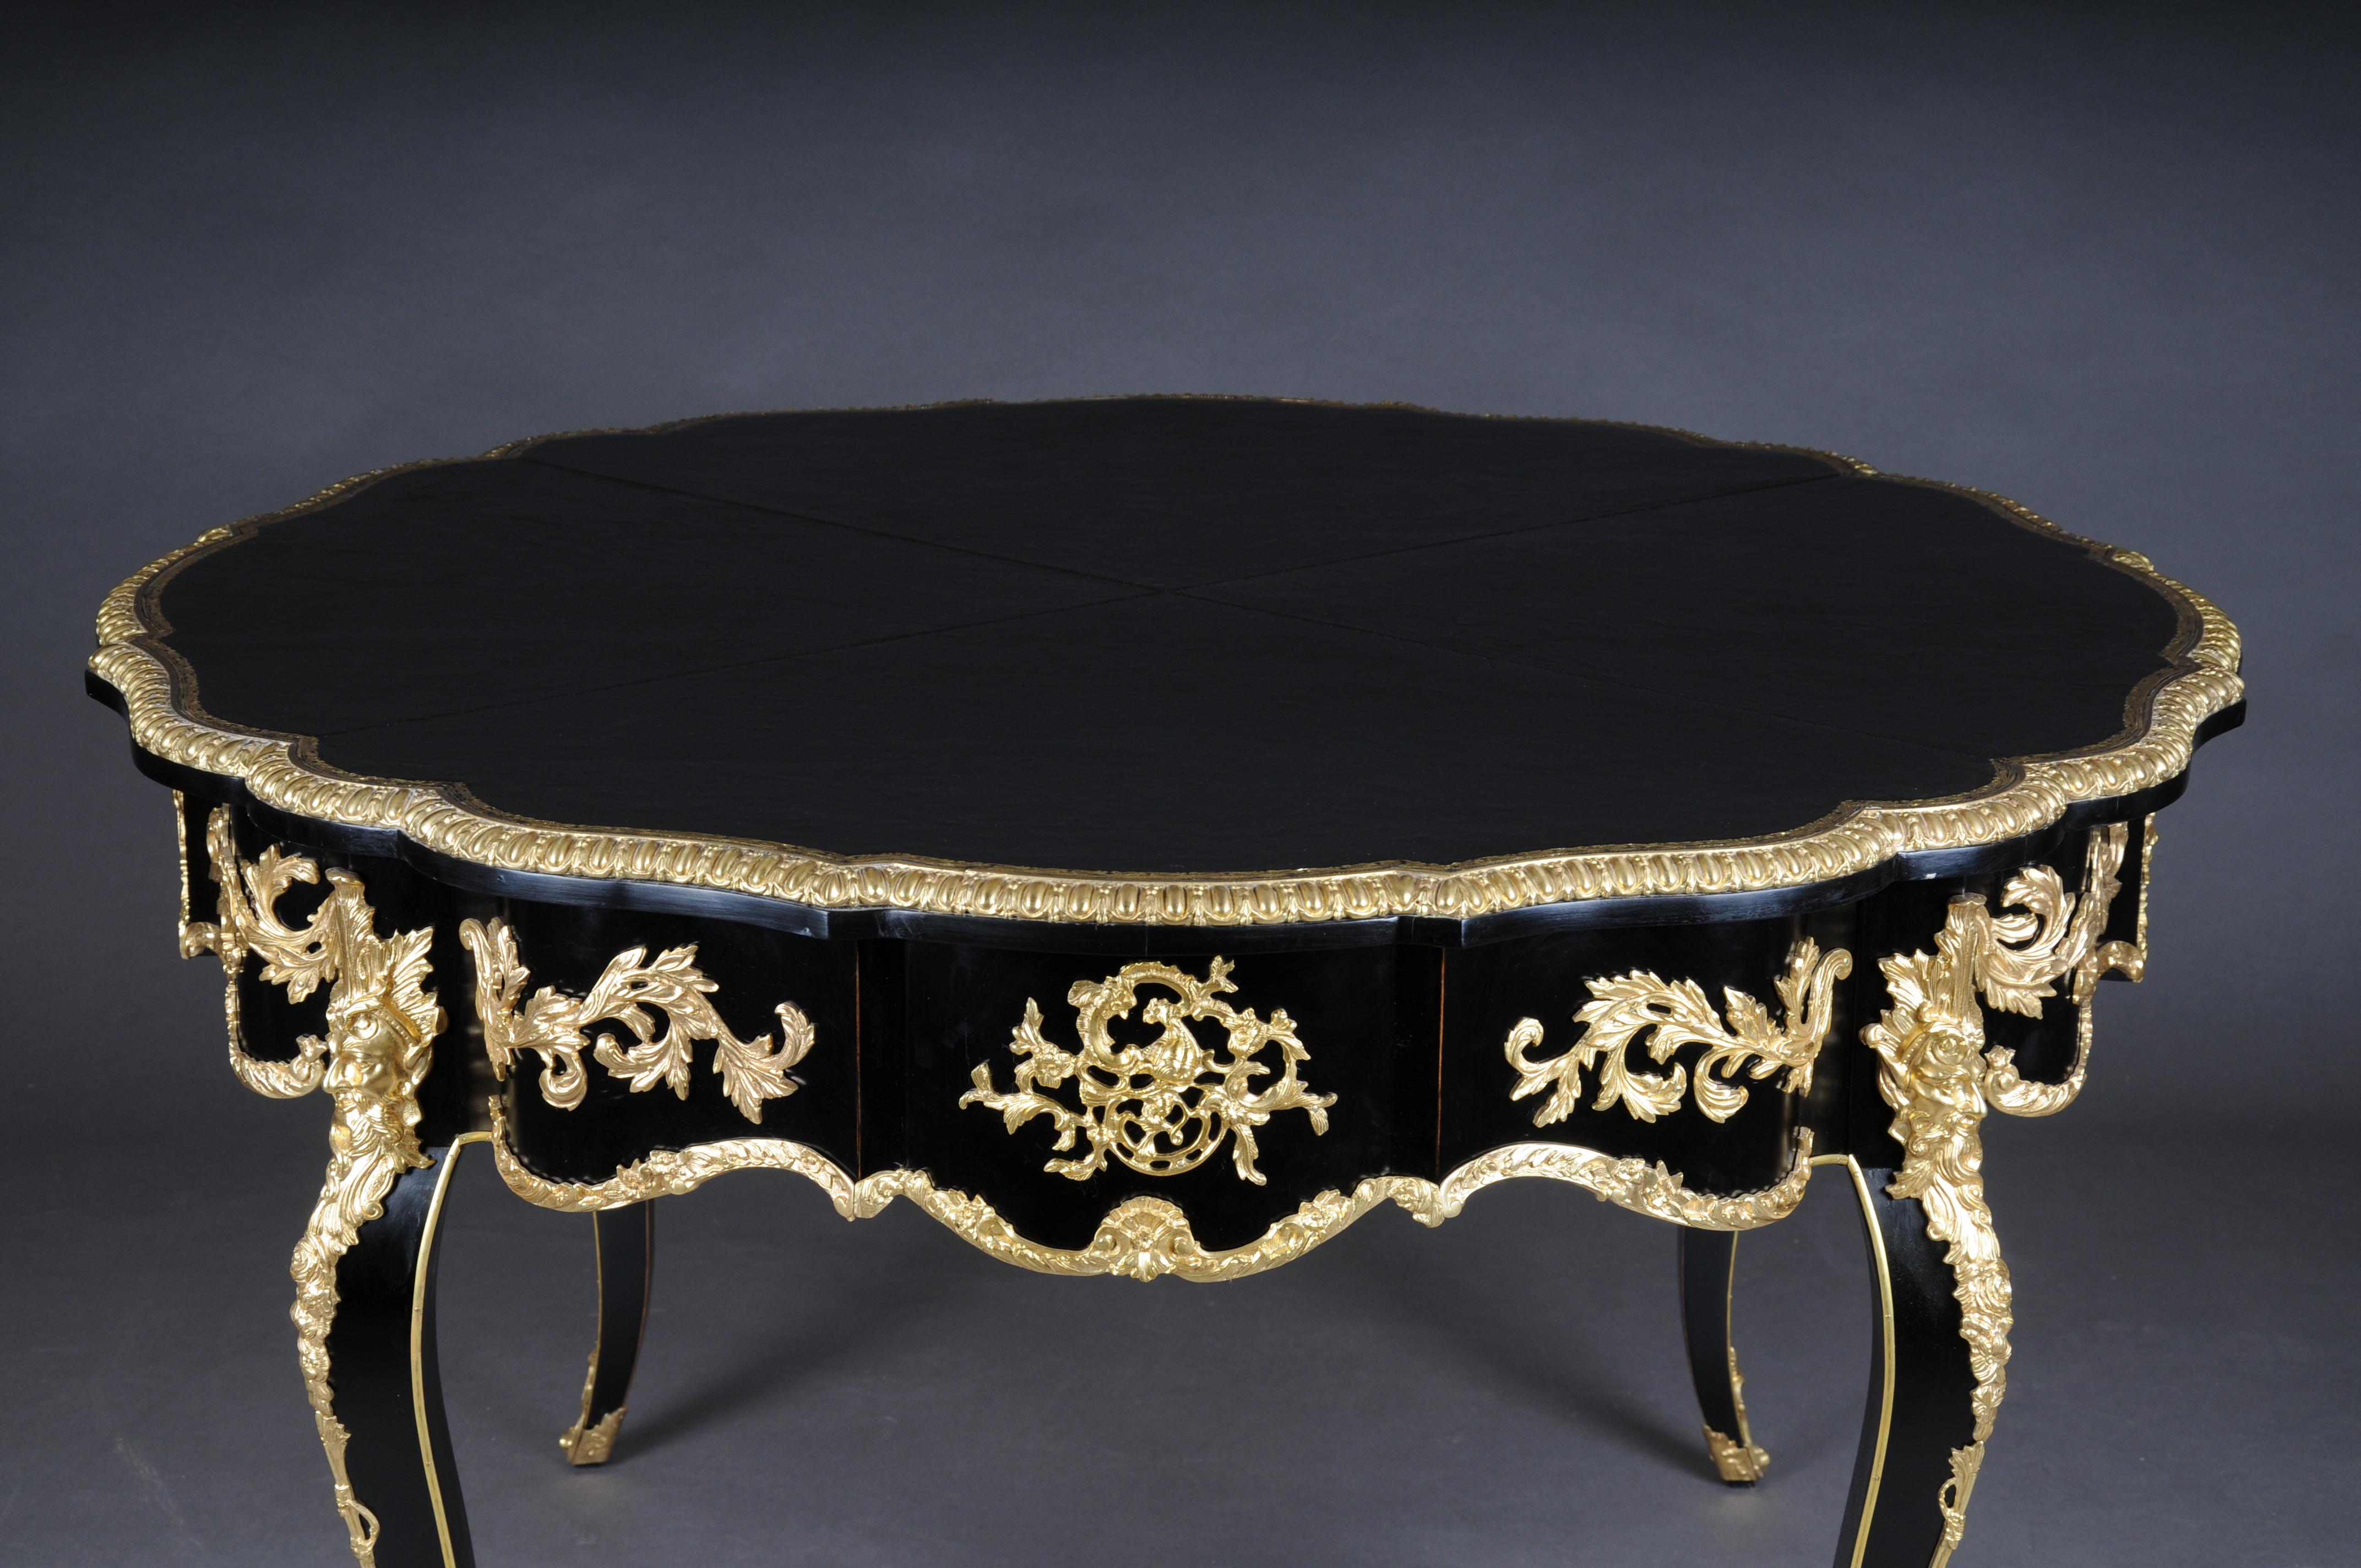 Majestic French 20th century Louis XV style Salon table, black gold.

Table top made from the finest genuine leather with gold embossing.
Table made of solid beech, chattered. Very rich gilded bronze fittings. Coffee table with an inconspicuous